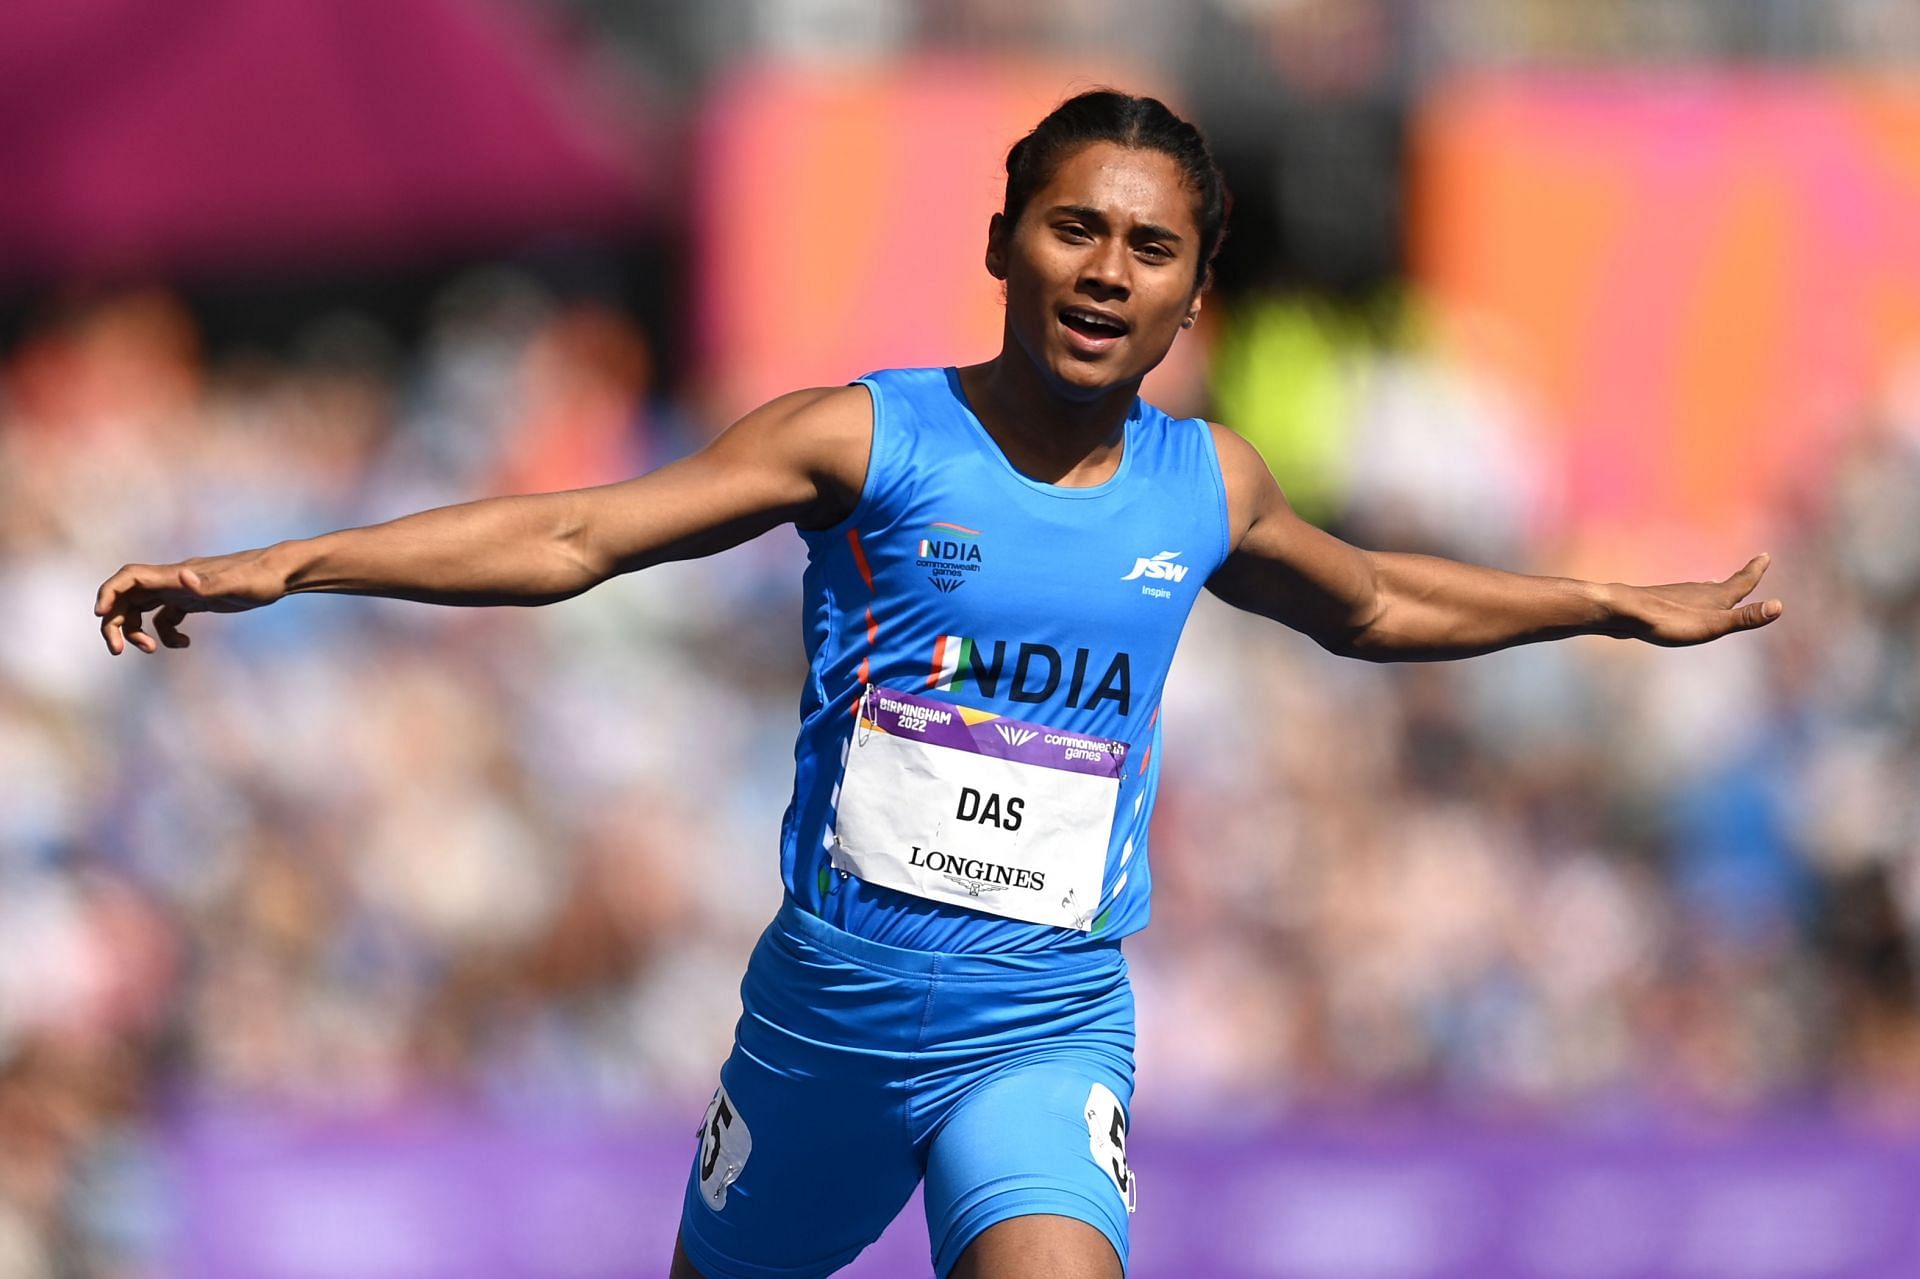 Indian sprinter Hima Das at CWG 2022. (PC: Getty Images)